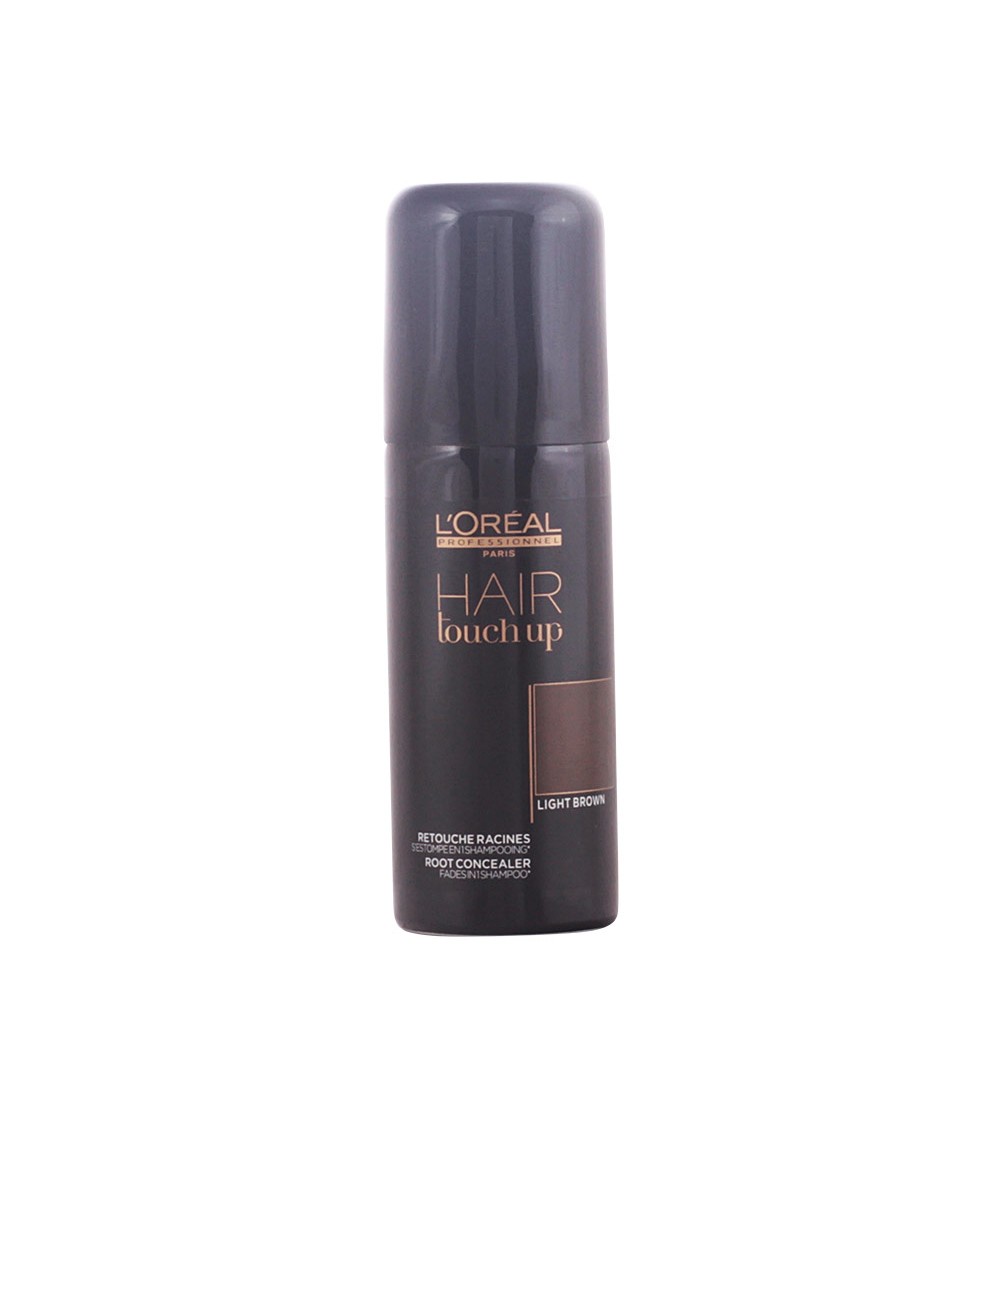 HAIR TOUCH UP root concealer 75ml